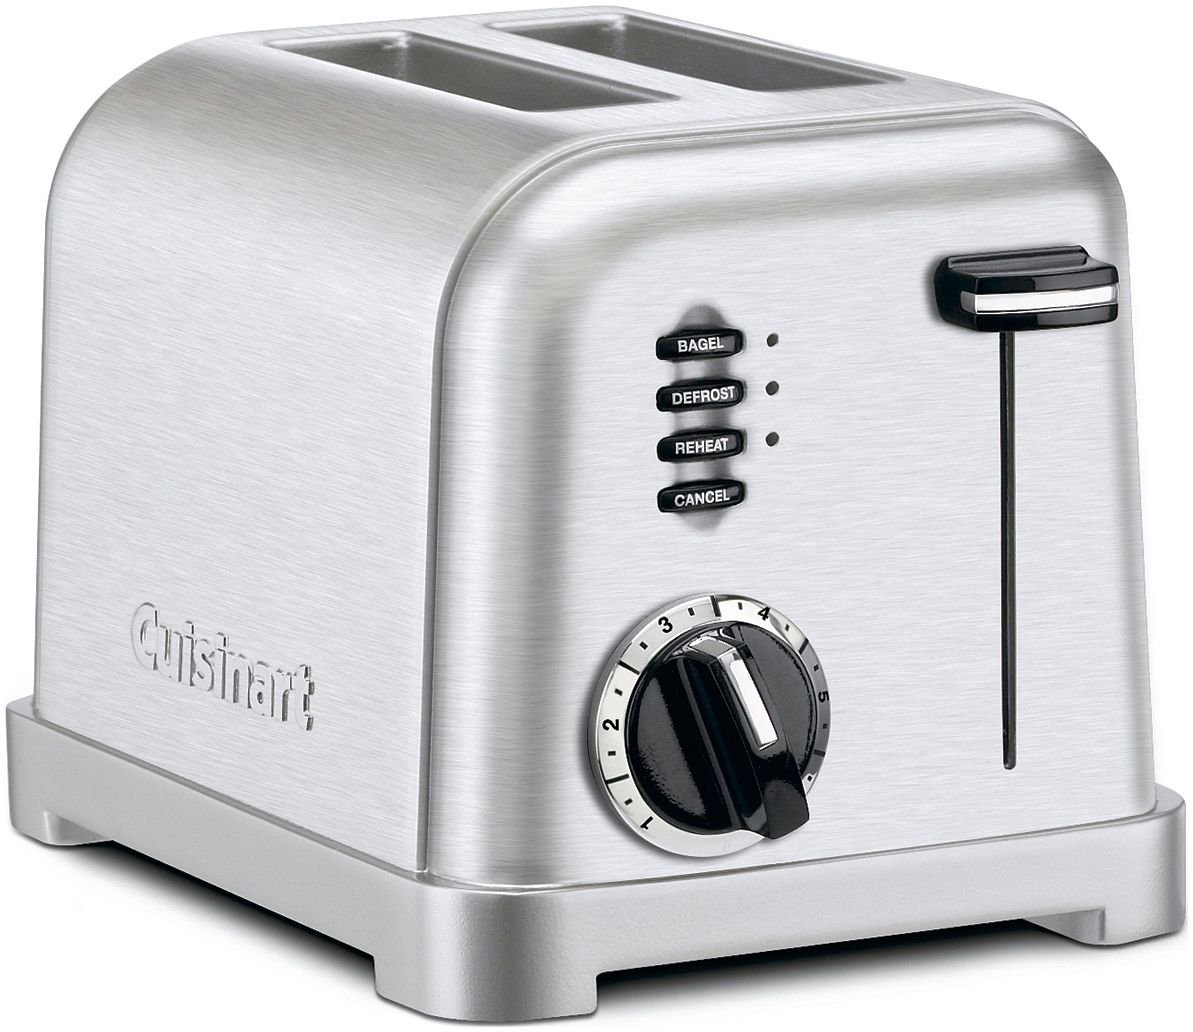 https://cdn.everythingkitchens.com/media/catalog/product/cache/70d878061ea71e5b62358b2b67547186/c/p/cpt-160-cuisinart-compact-2-slice-toaster-stainless-popup_2.jpg